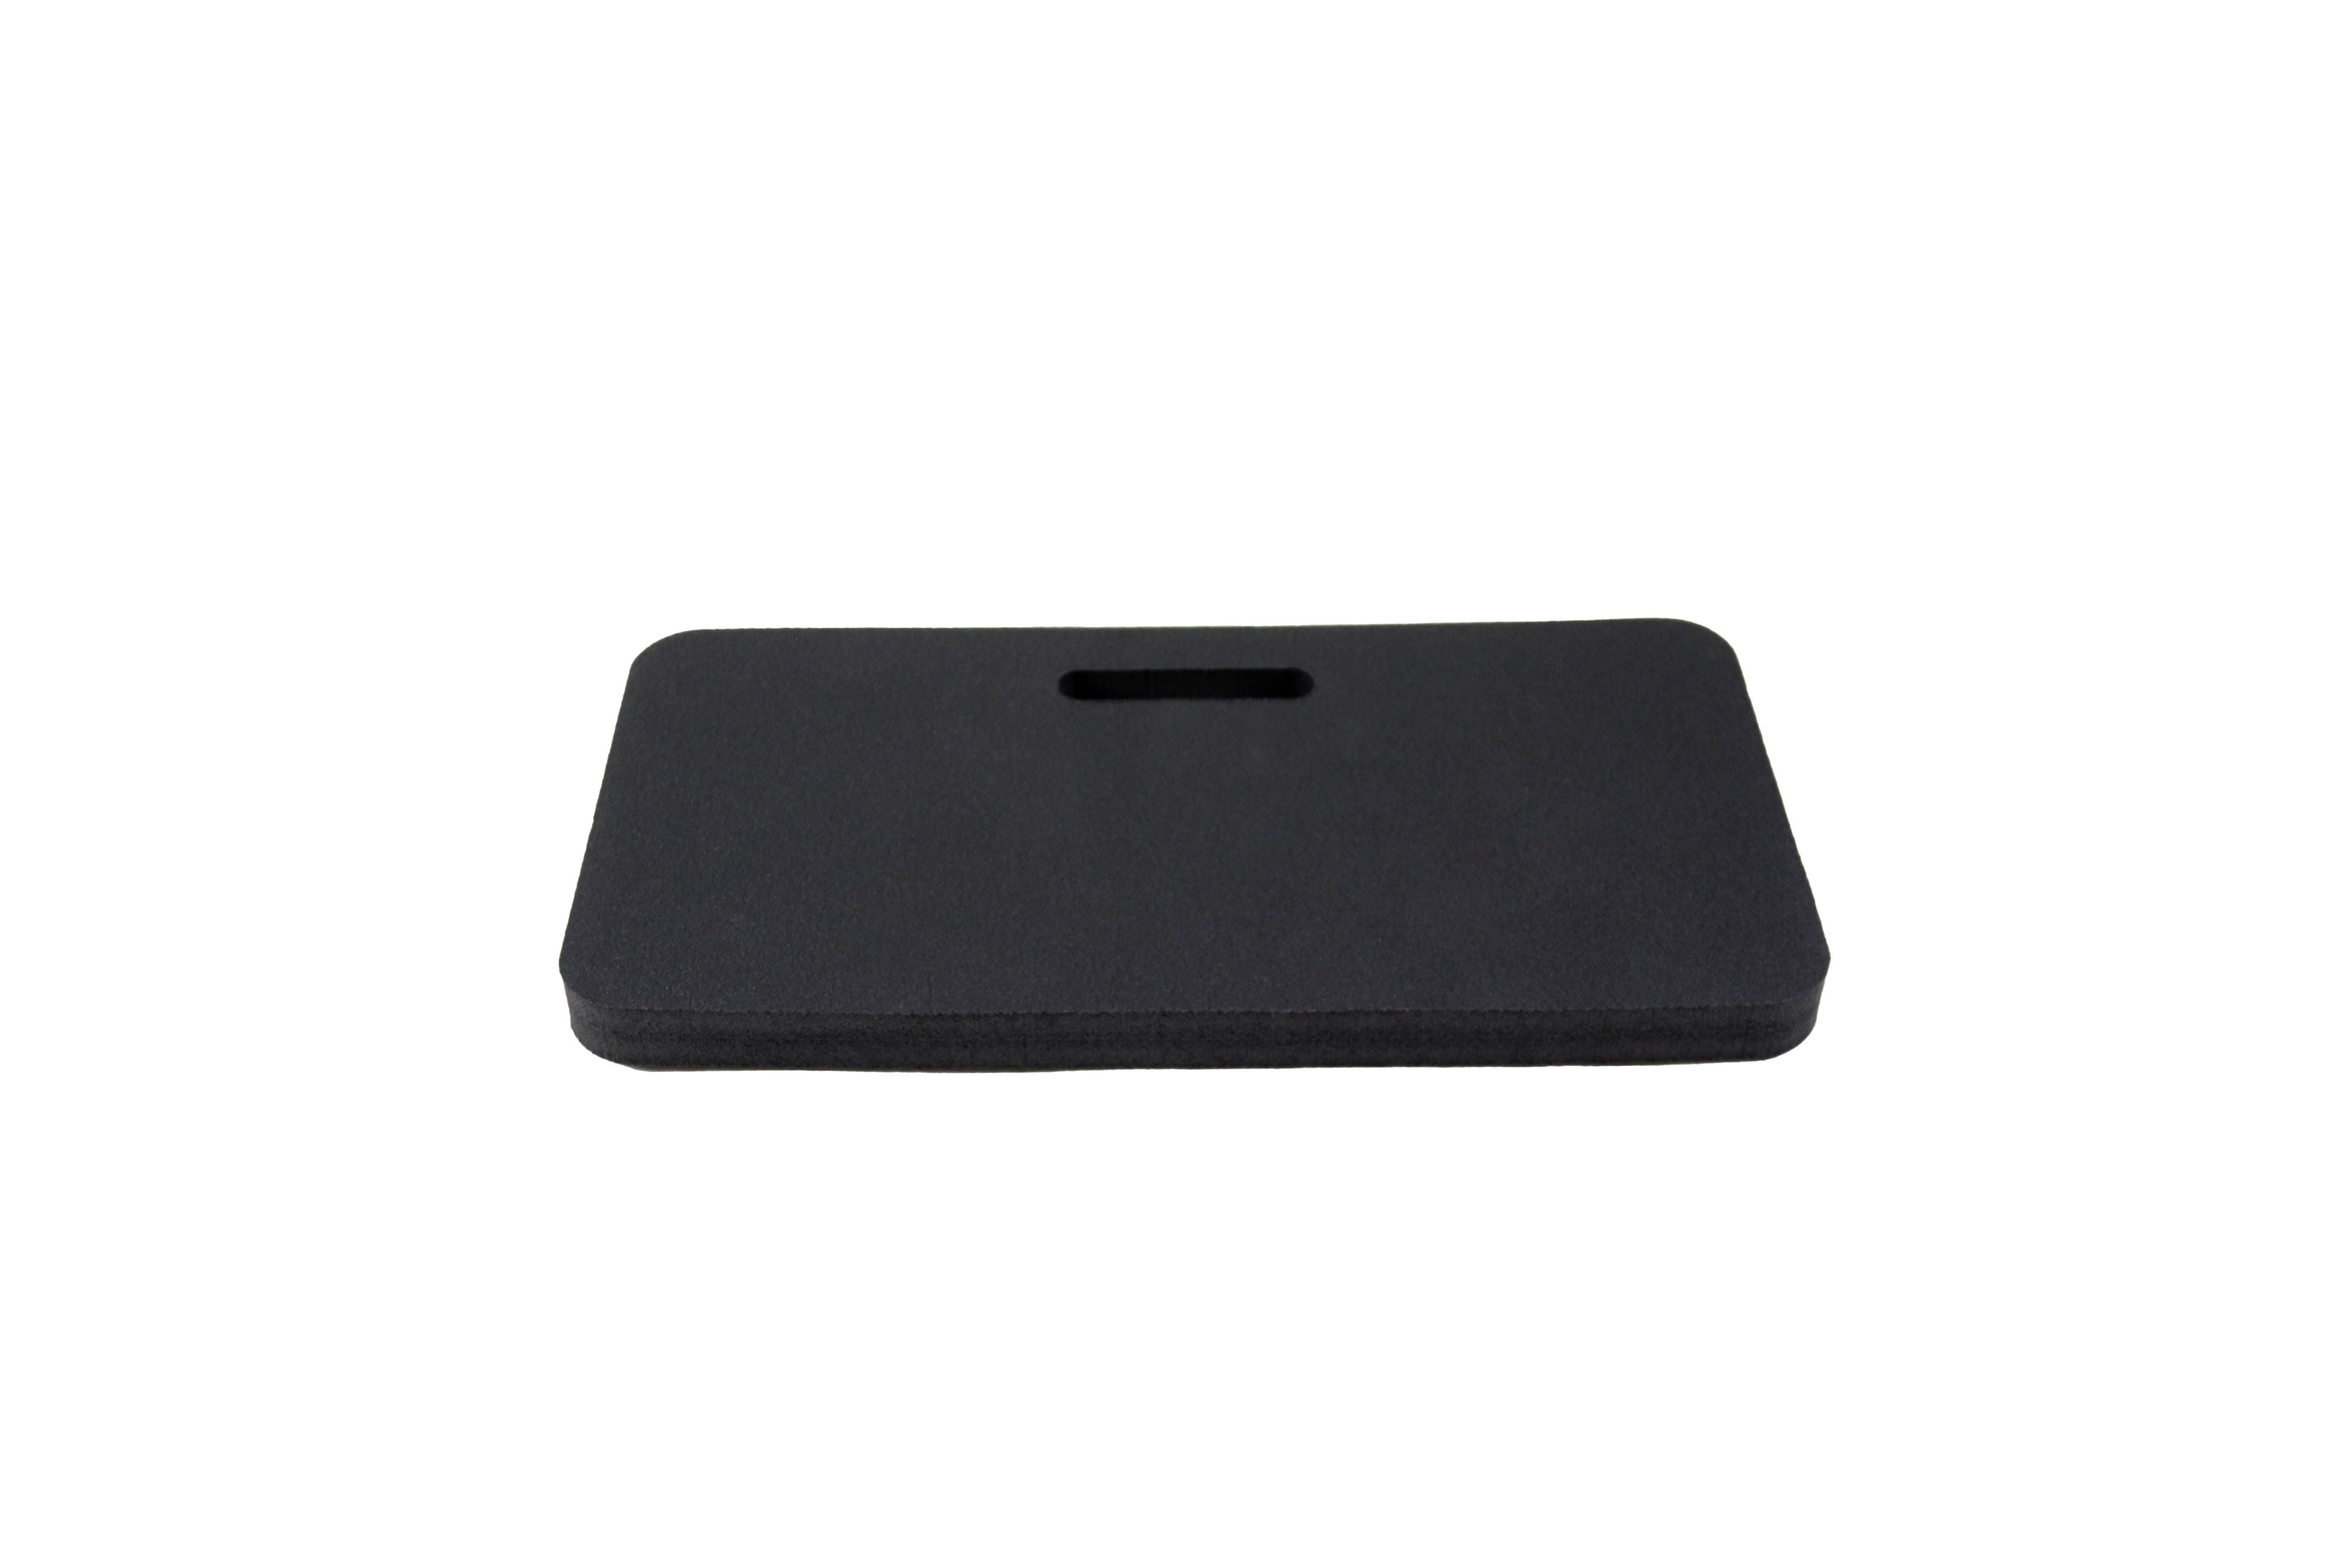 Portable Knee Cushion for Home Garden Work Automotive Workshop and More Durable Thick Comfortable High Density Waterproof Black Foam 16 x 8 Inches Kneeling Pad